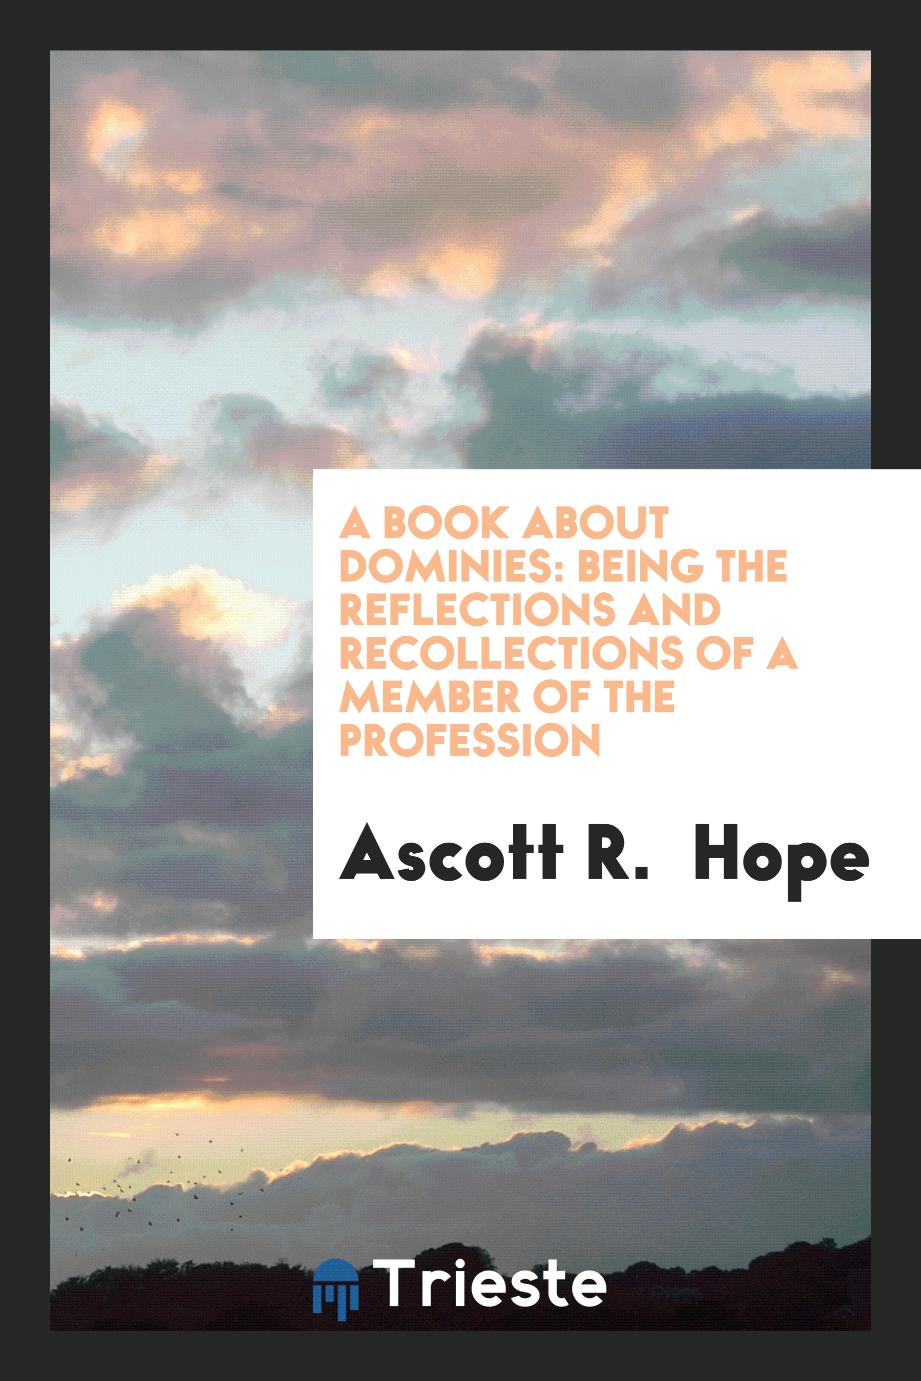 A book about dominies: being the reflections and recollections of a member of the profession